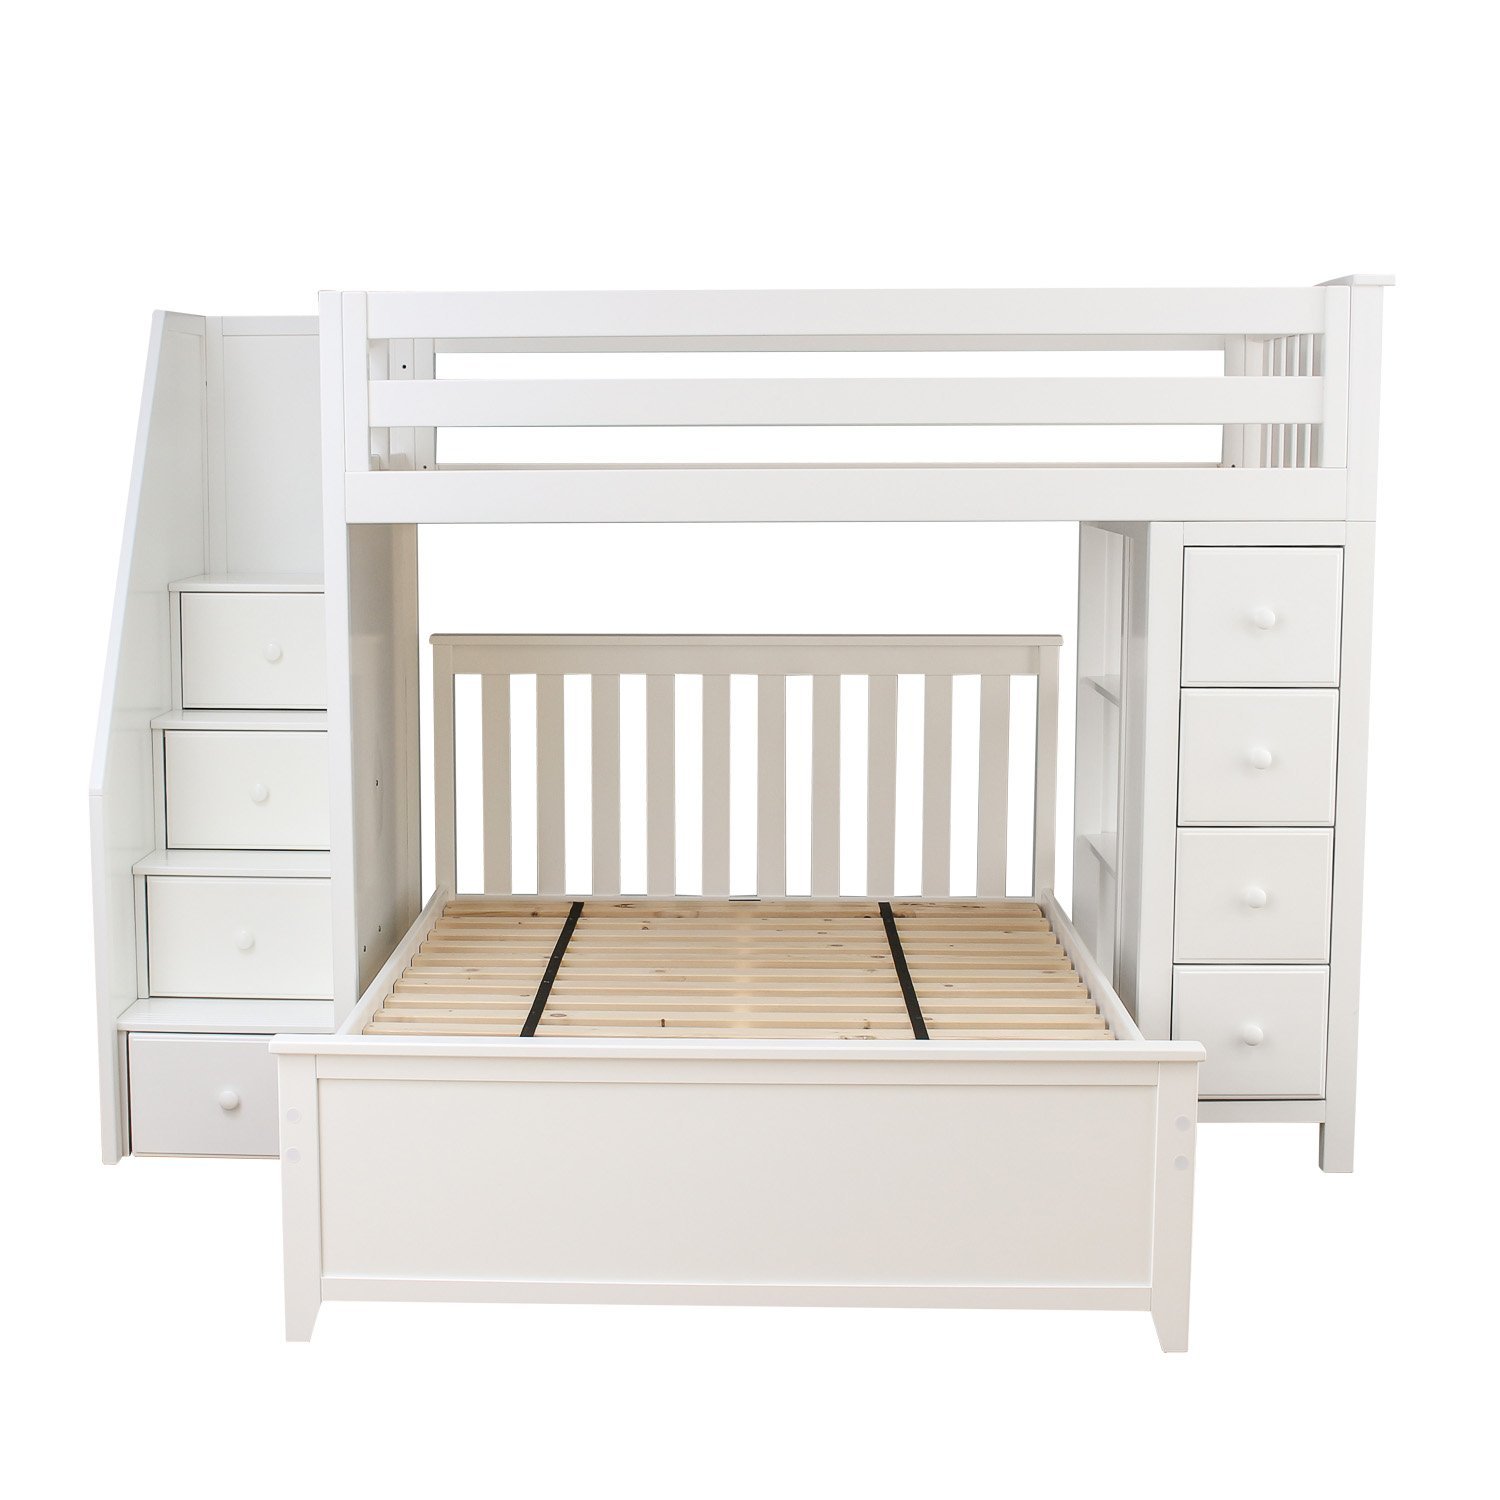 Jackpot! Deluxe All-in-One Solid Hardwood Twin-Size Storage Loft Bed with Staircase over Full-Size Bed, White